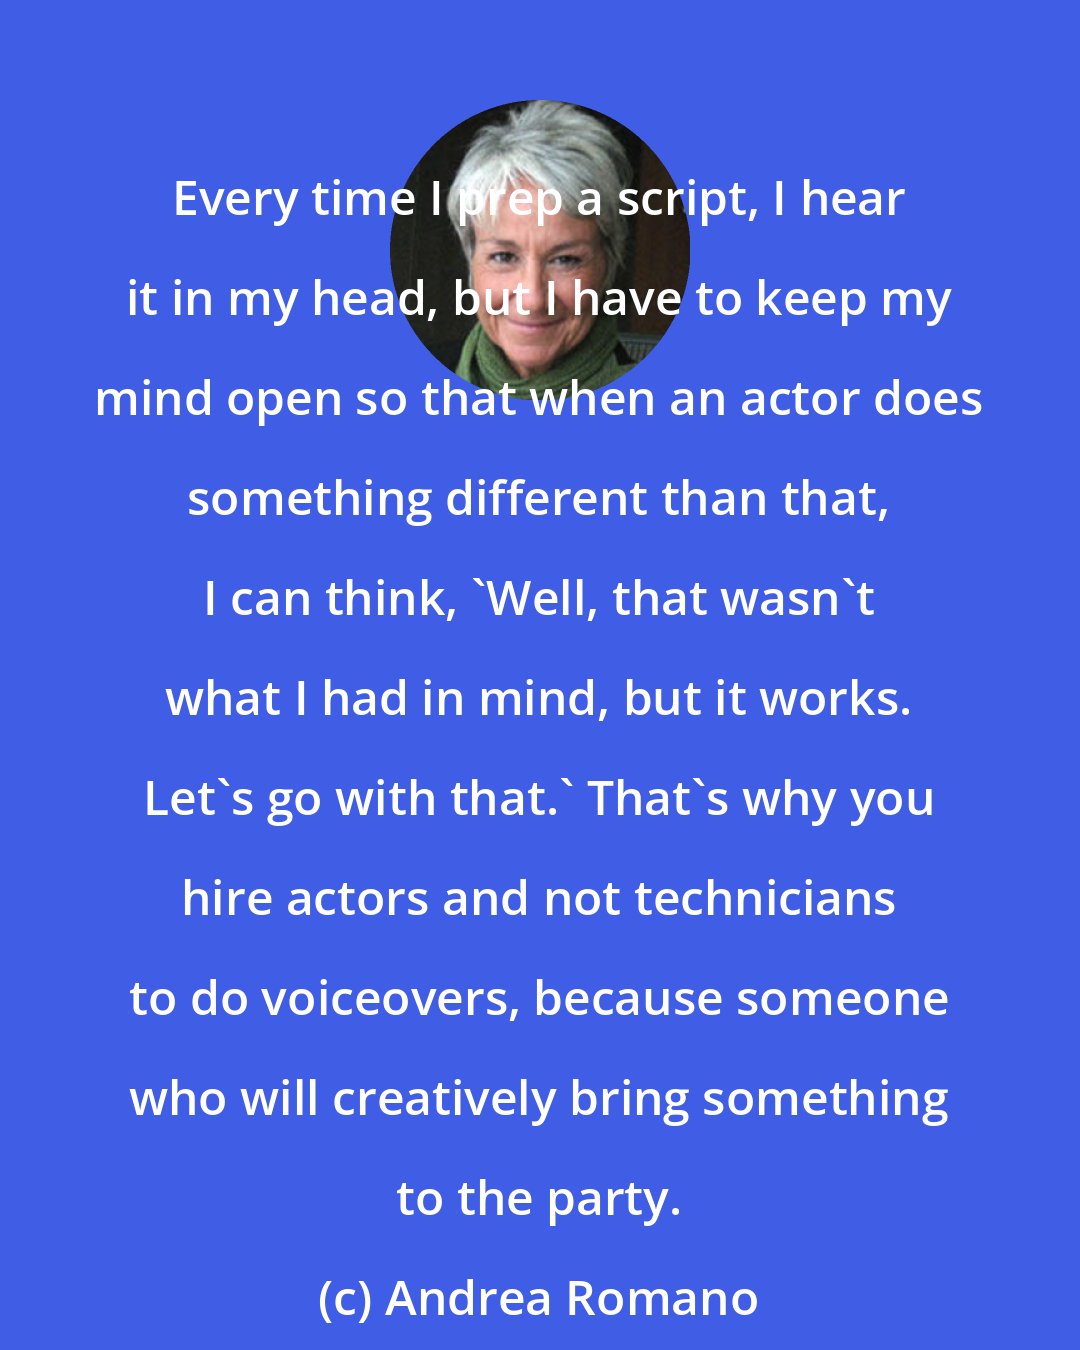 Andrea Romano: Every time I prep a script, I hear it in my head, but I have to keep my mind open so that when an actor does something different than that, I can think, 'Well, that wasn't what I had in mind, but it works. Let's go with that.' That's why you hire actors and not technicians to do voiceovers, because someone who will creatively bring something to the party.